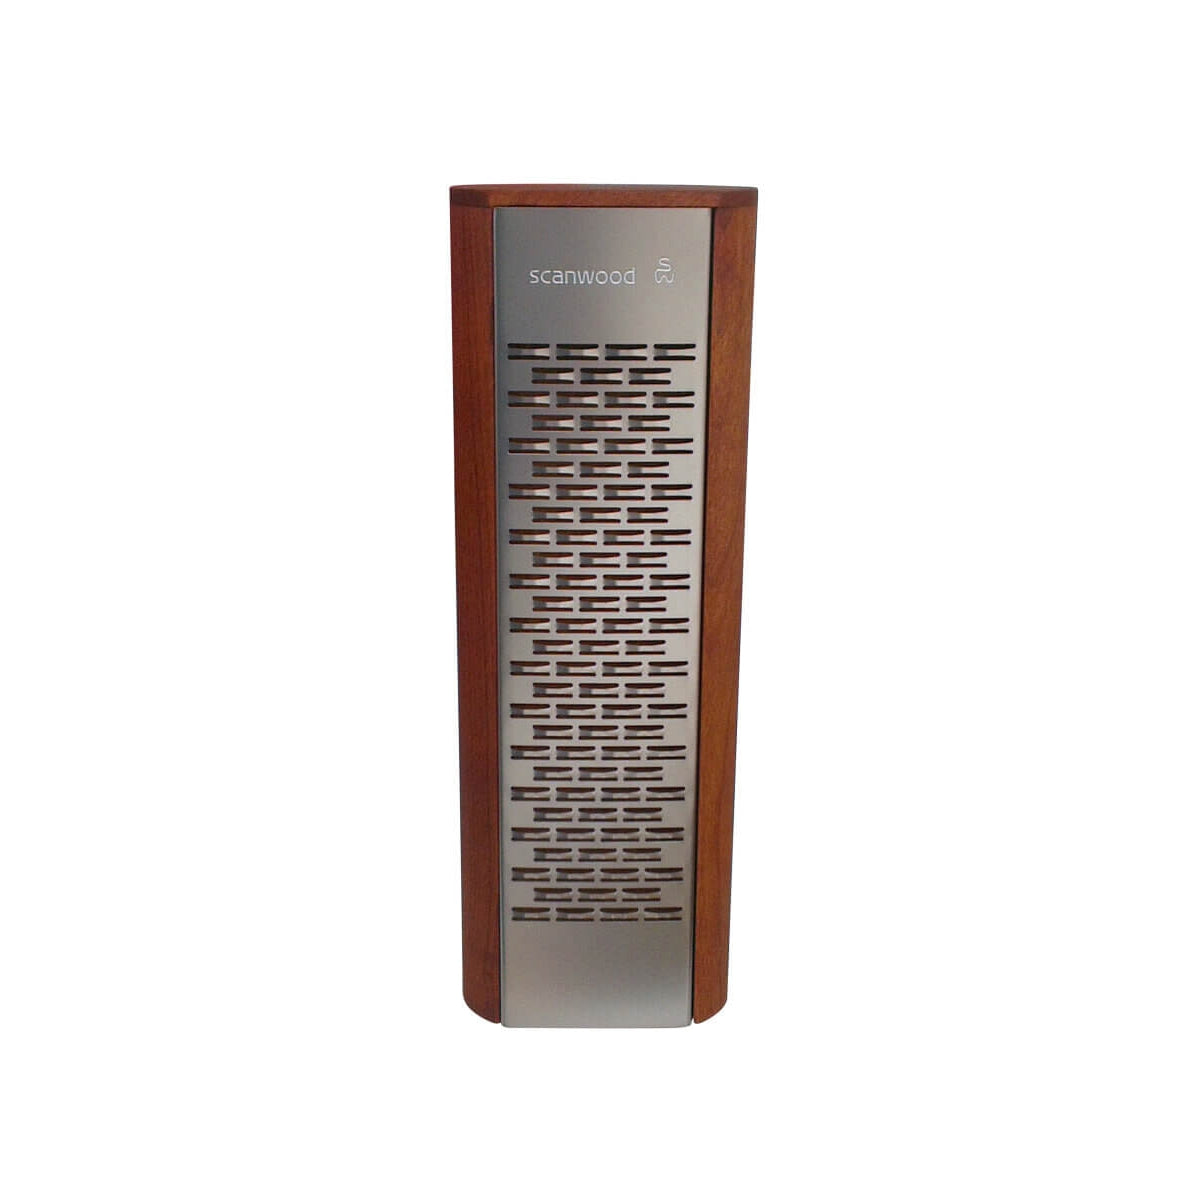 ScanWood Cherry Wood Cheese Grater